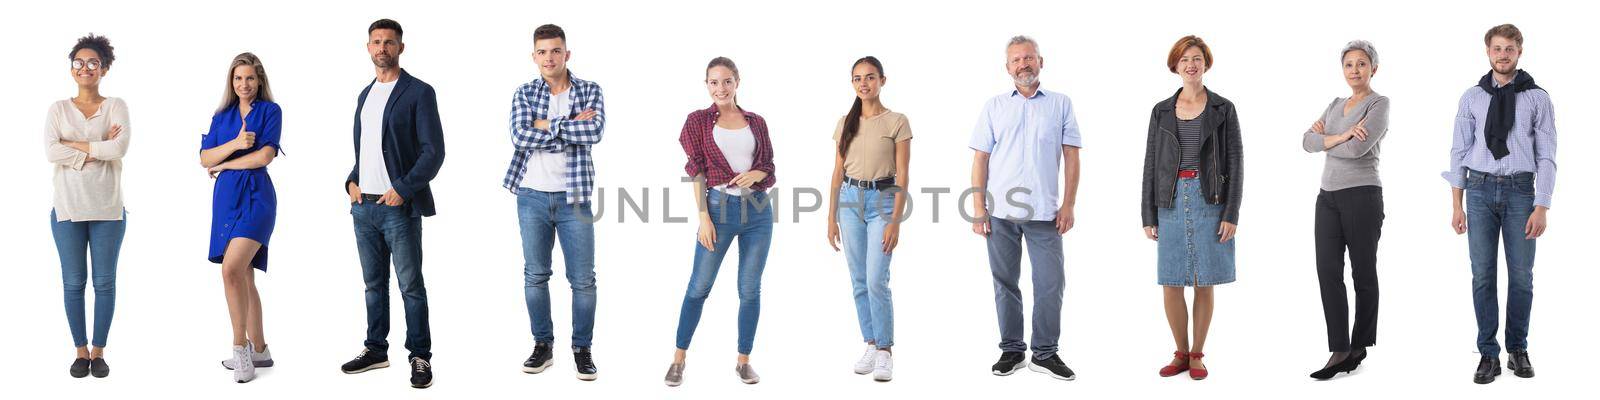 Set portrait of people on white by ALotOfPeople